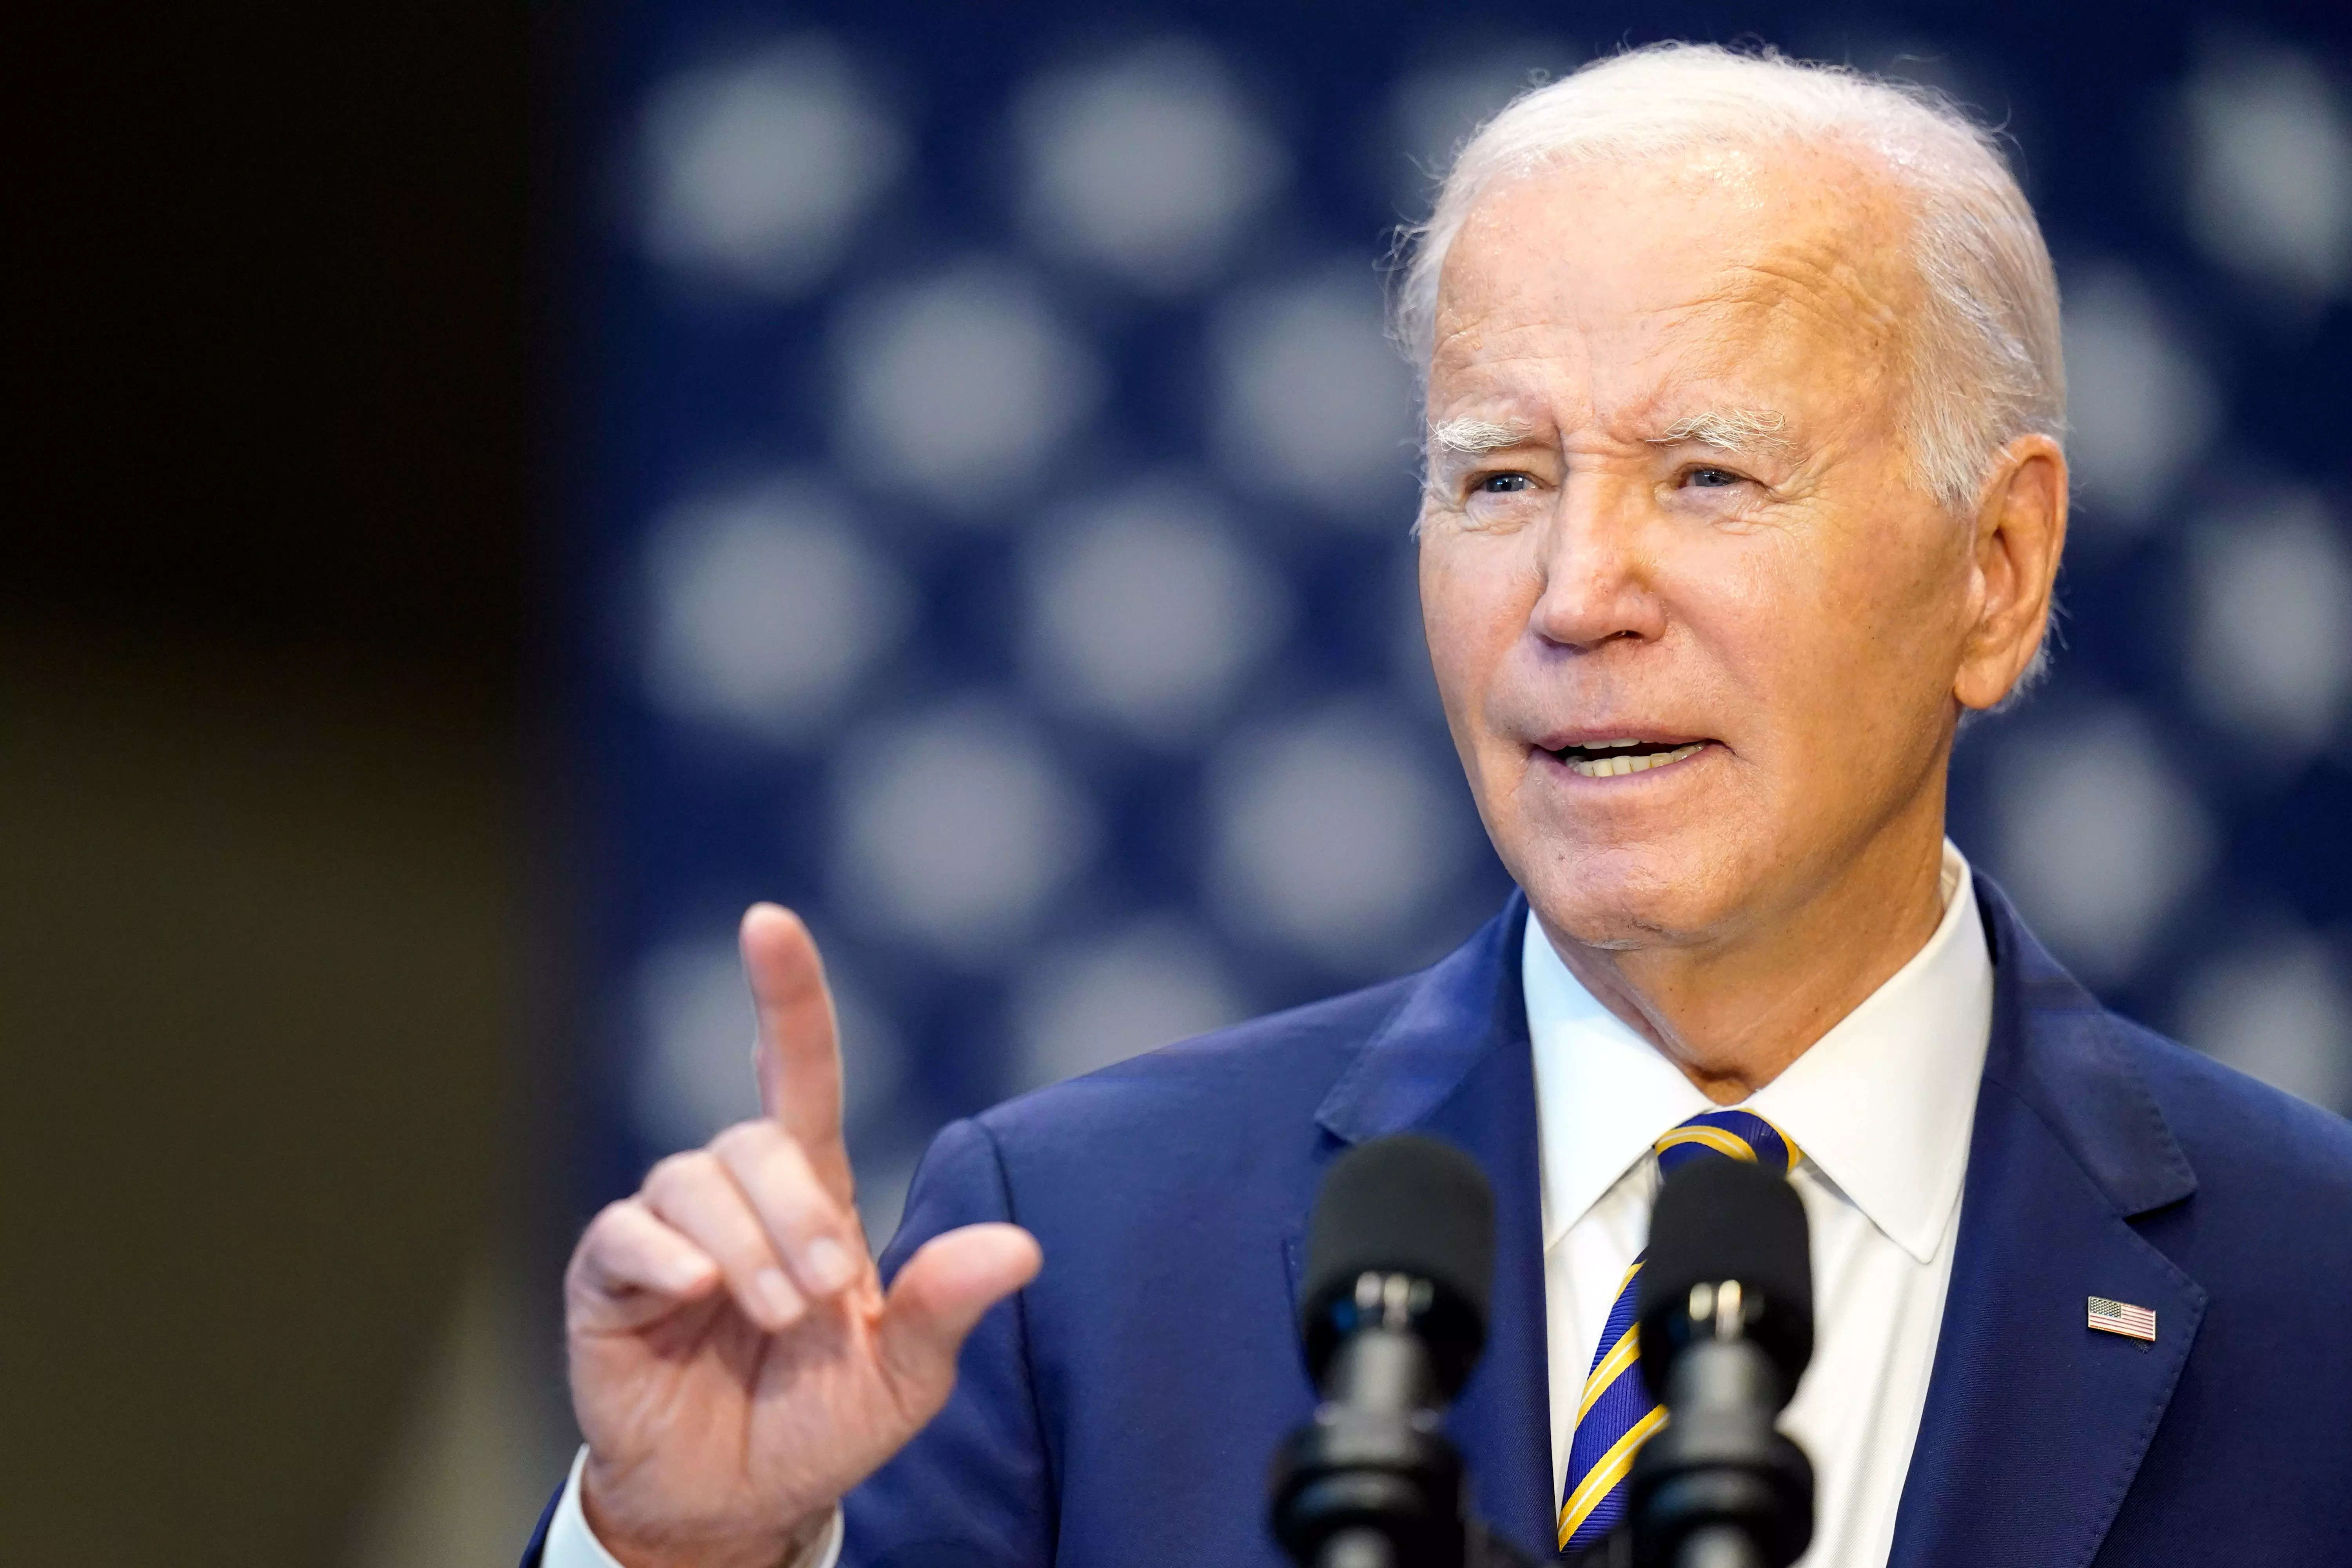 Lots of governors think that Biden needs to be attending way more groundbreakings on infrastructure law projects to push back on the idea he’s too old to govern